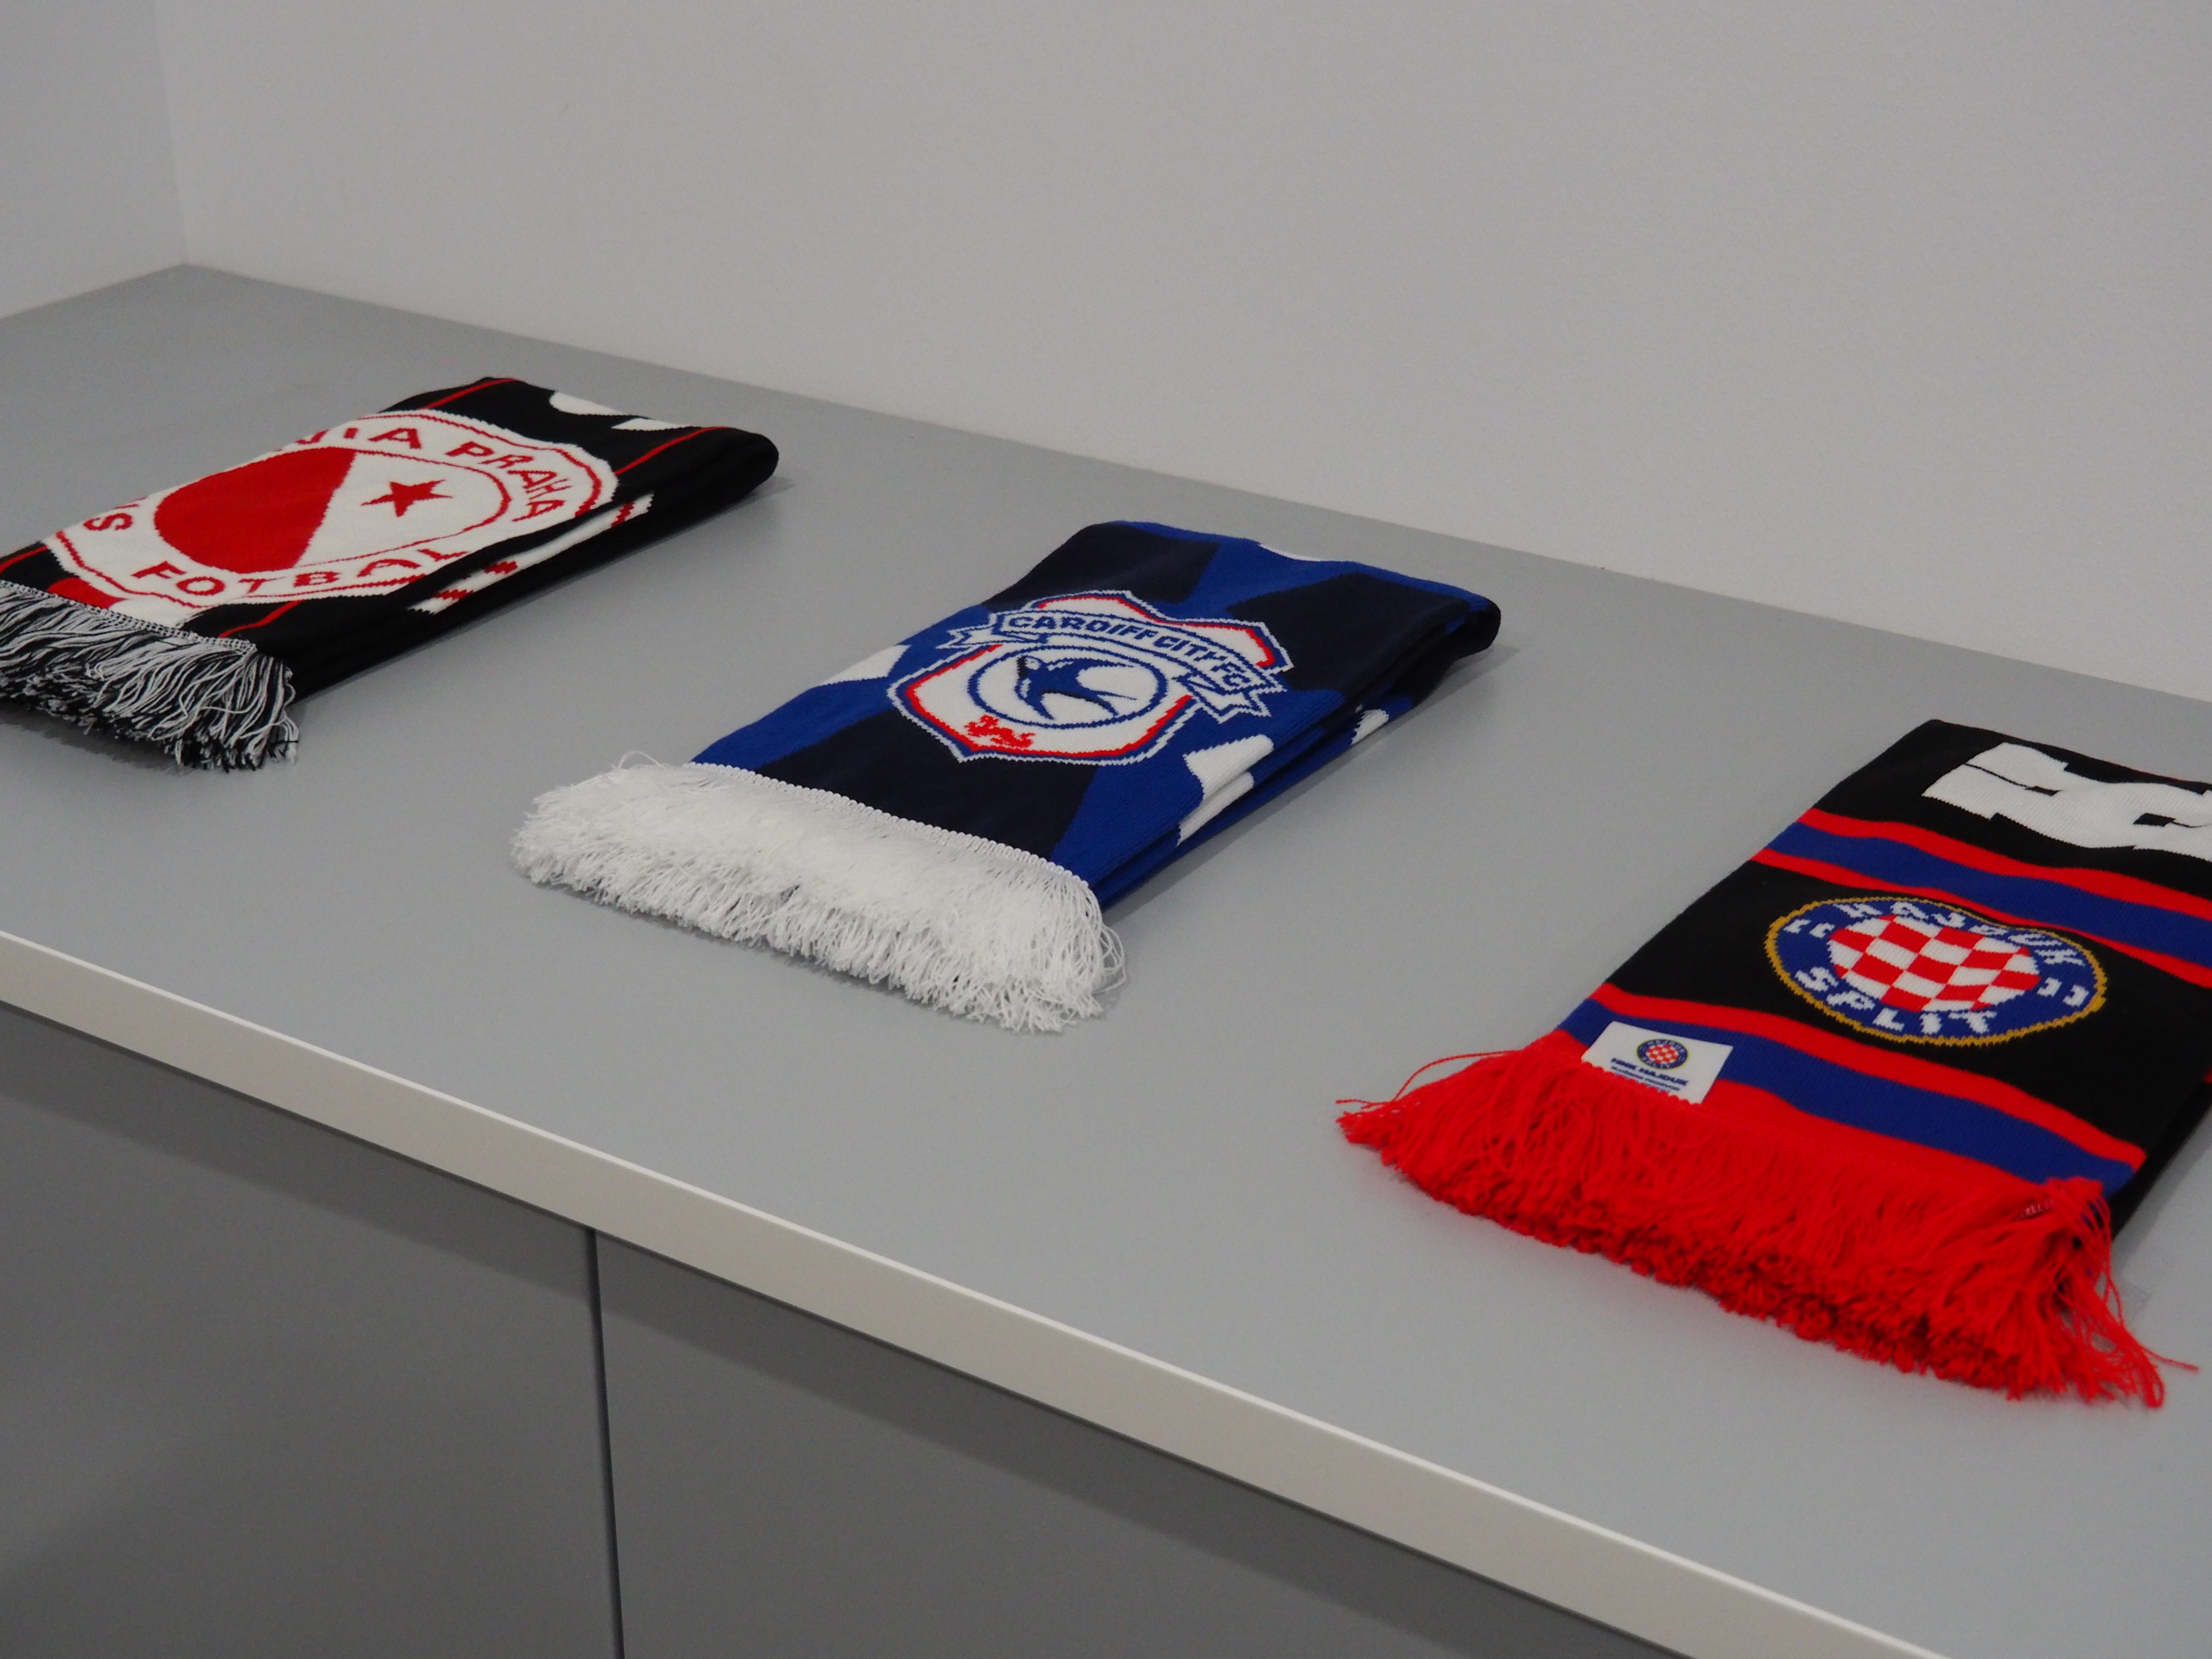 Why are scarves popular in soccer?